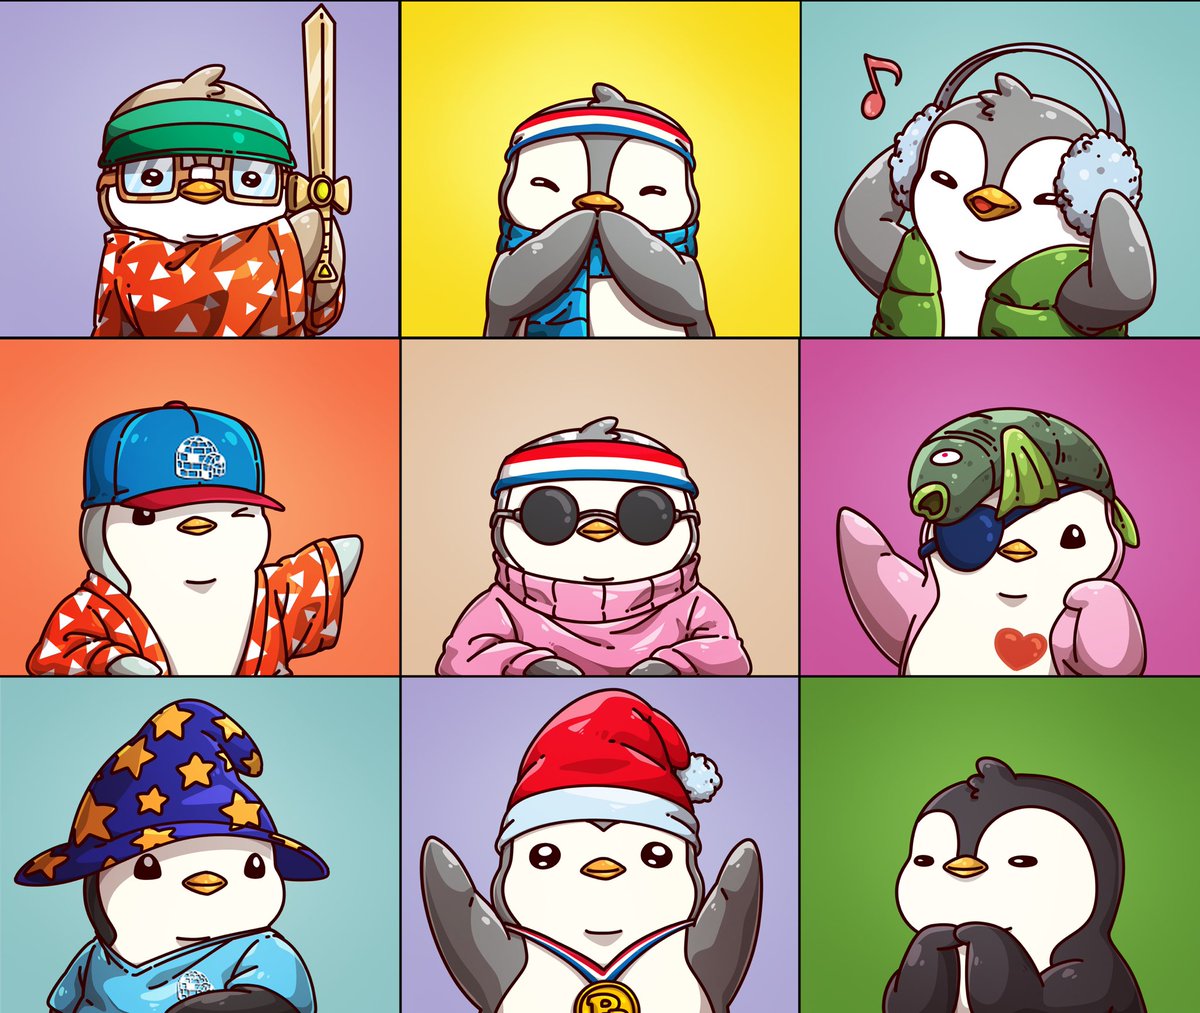 Sticker pack for Pudgy Penguin community members. Commissioned by: @taxninja Please connect with me if you want to create your own artwork.